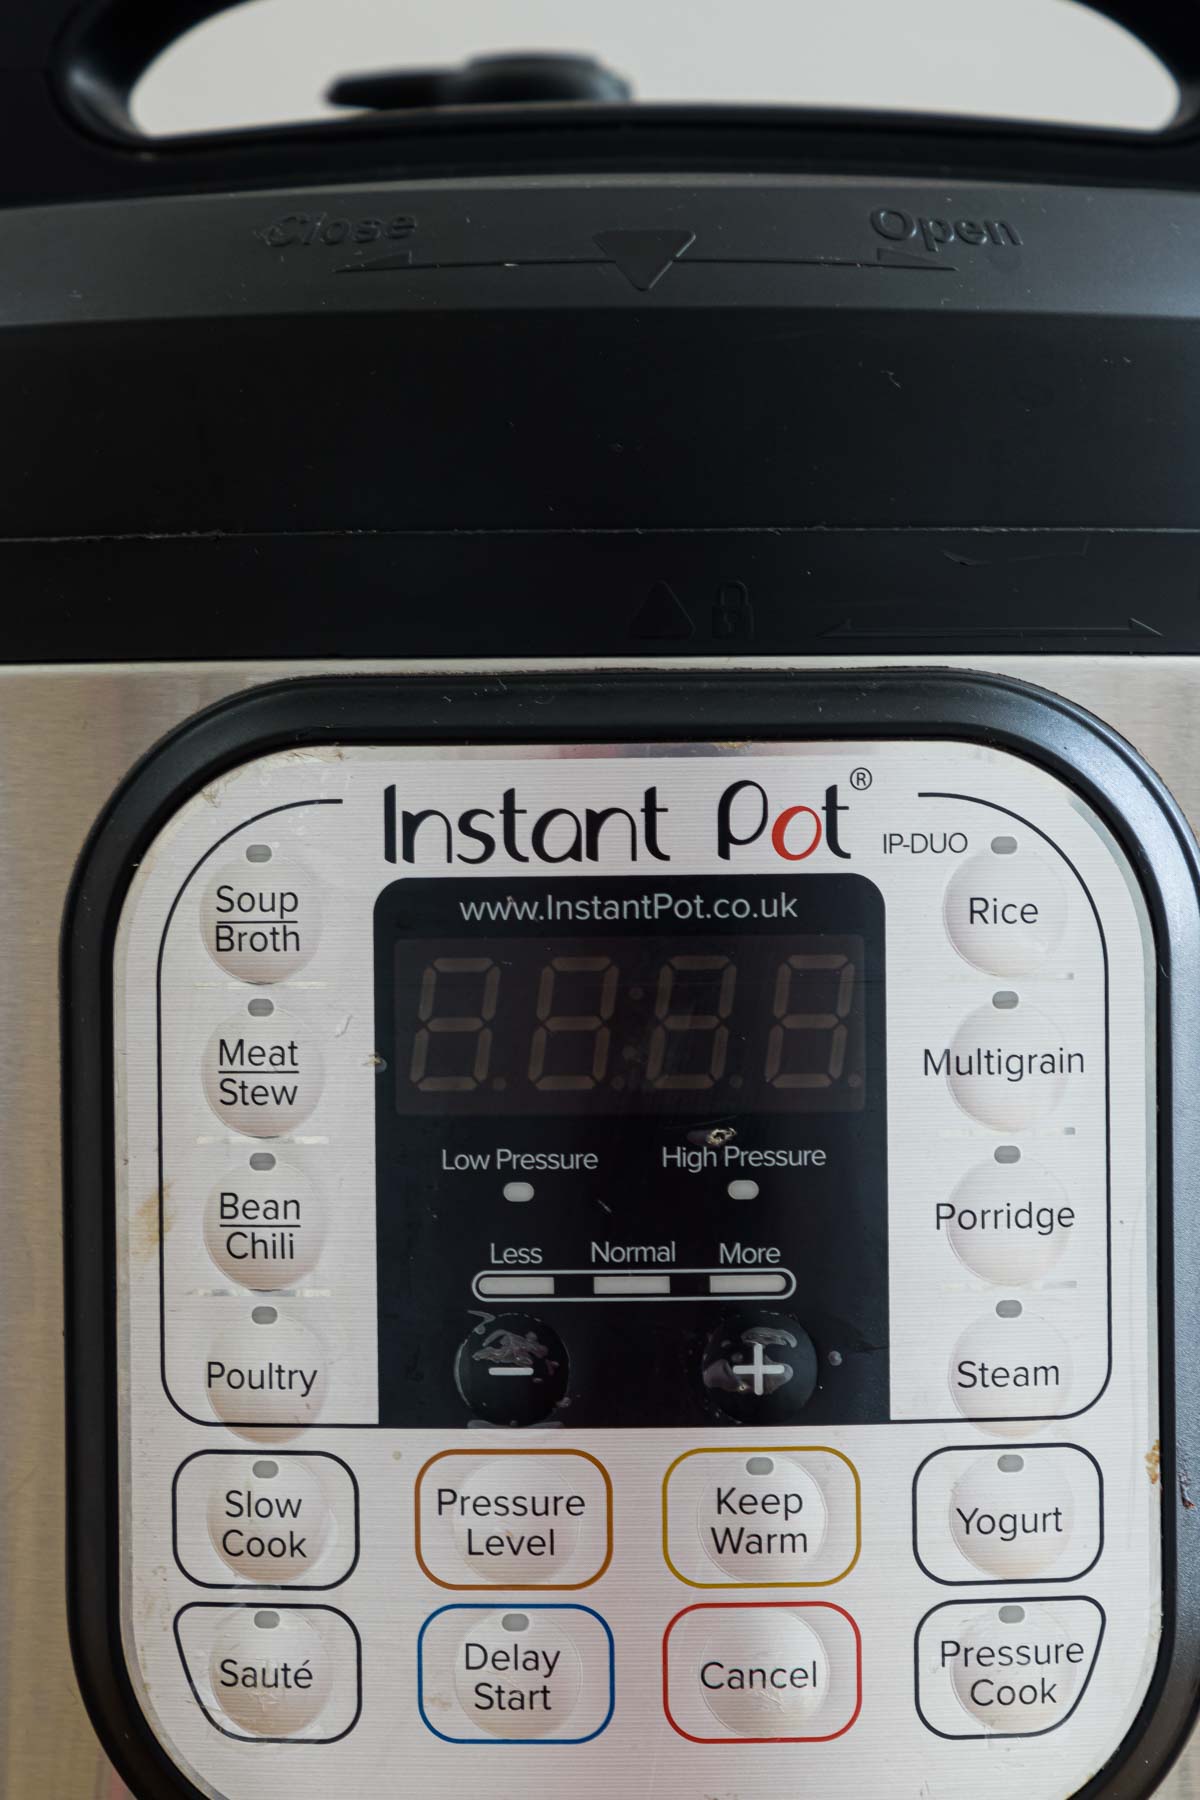 close up view of the instant pot buttons